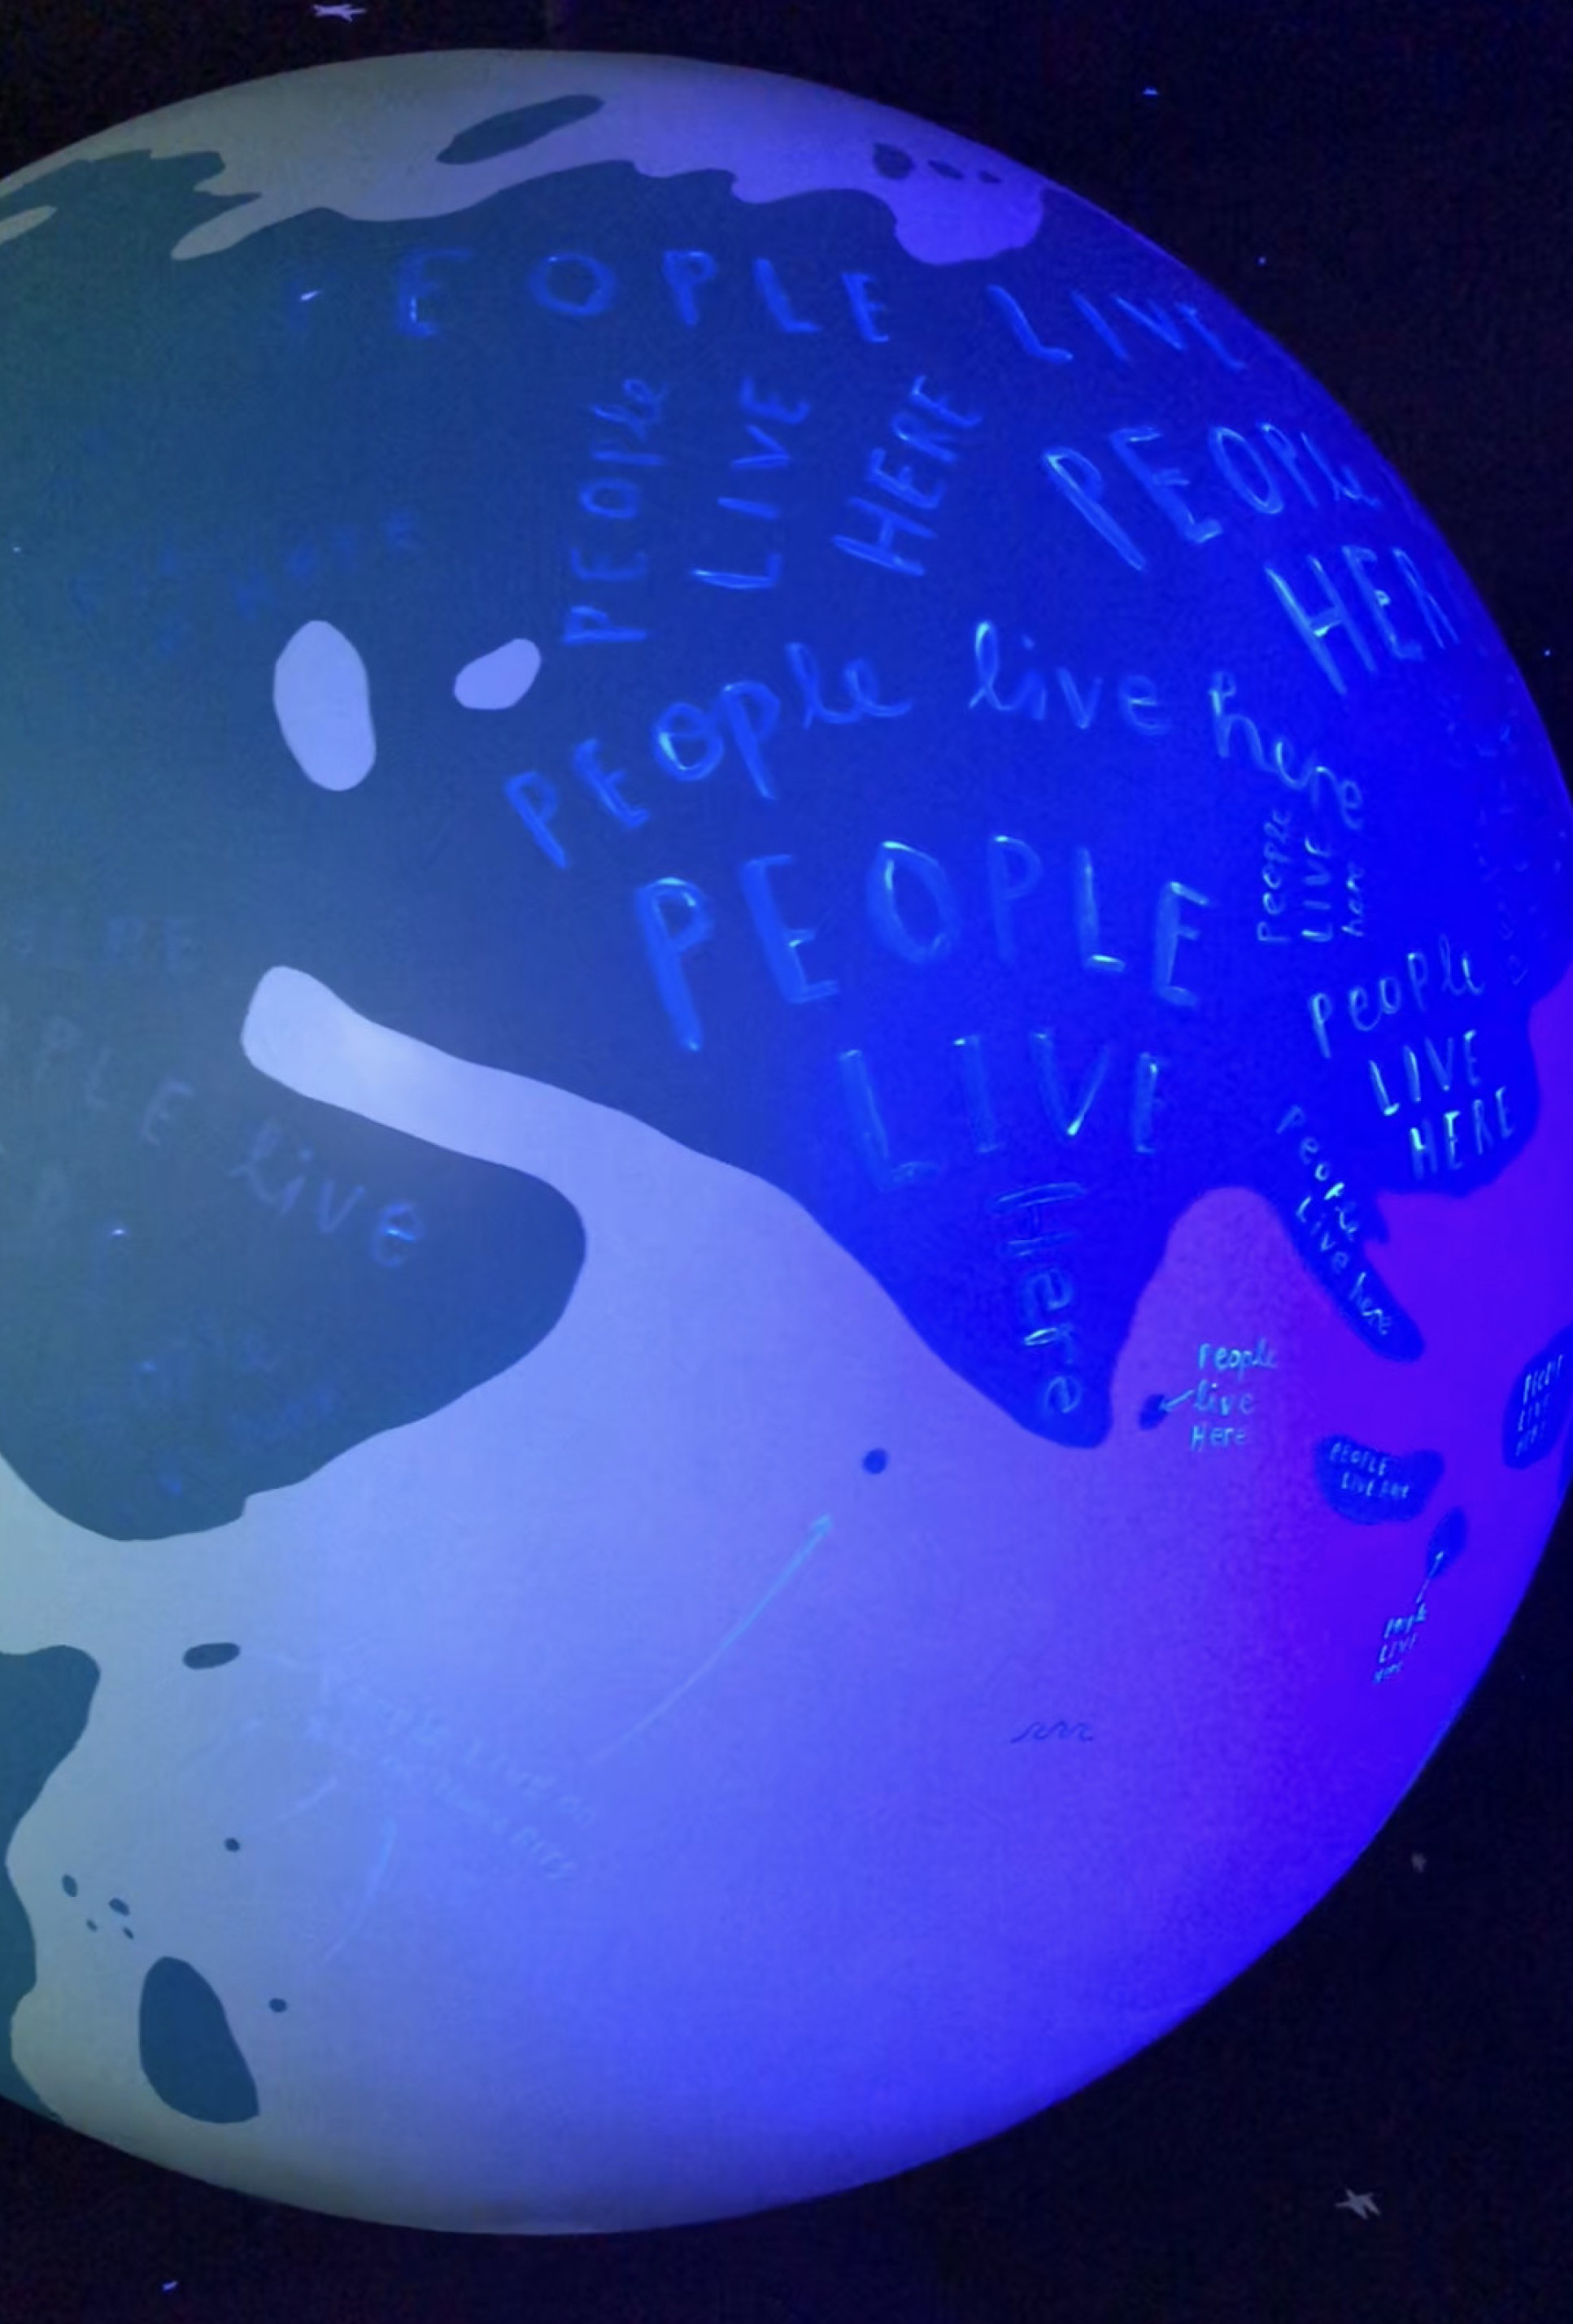 Photo of glow in the dark globe with 'people live here' written on it in glow in the dark paint